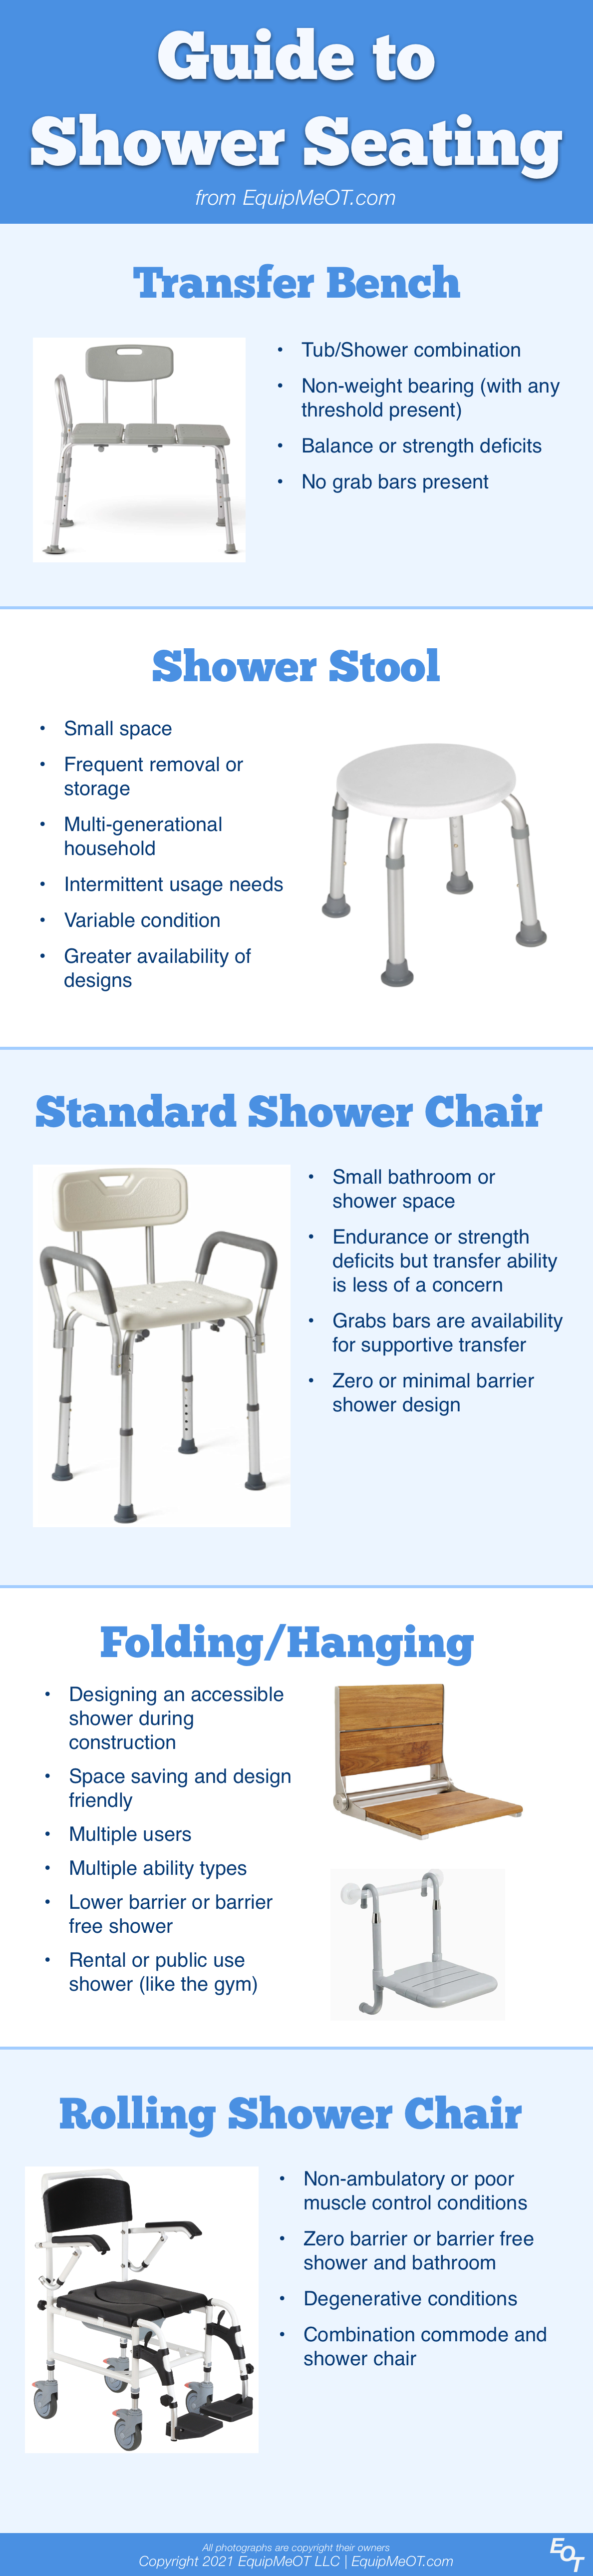 The Complete Guide to Shower Seating